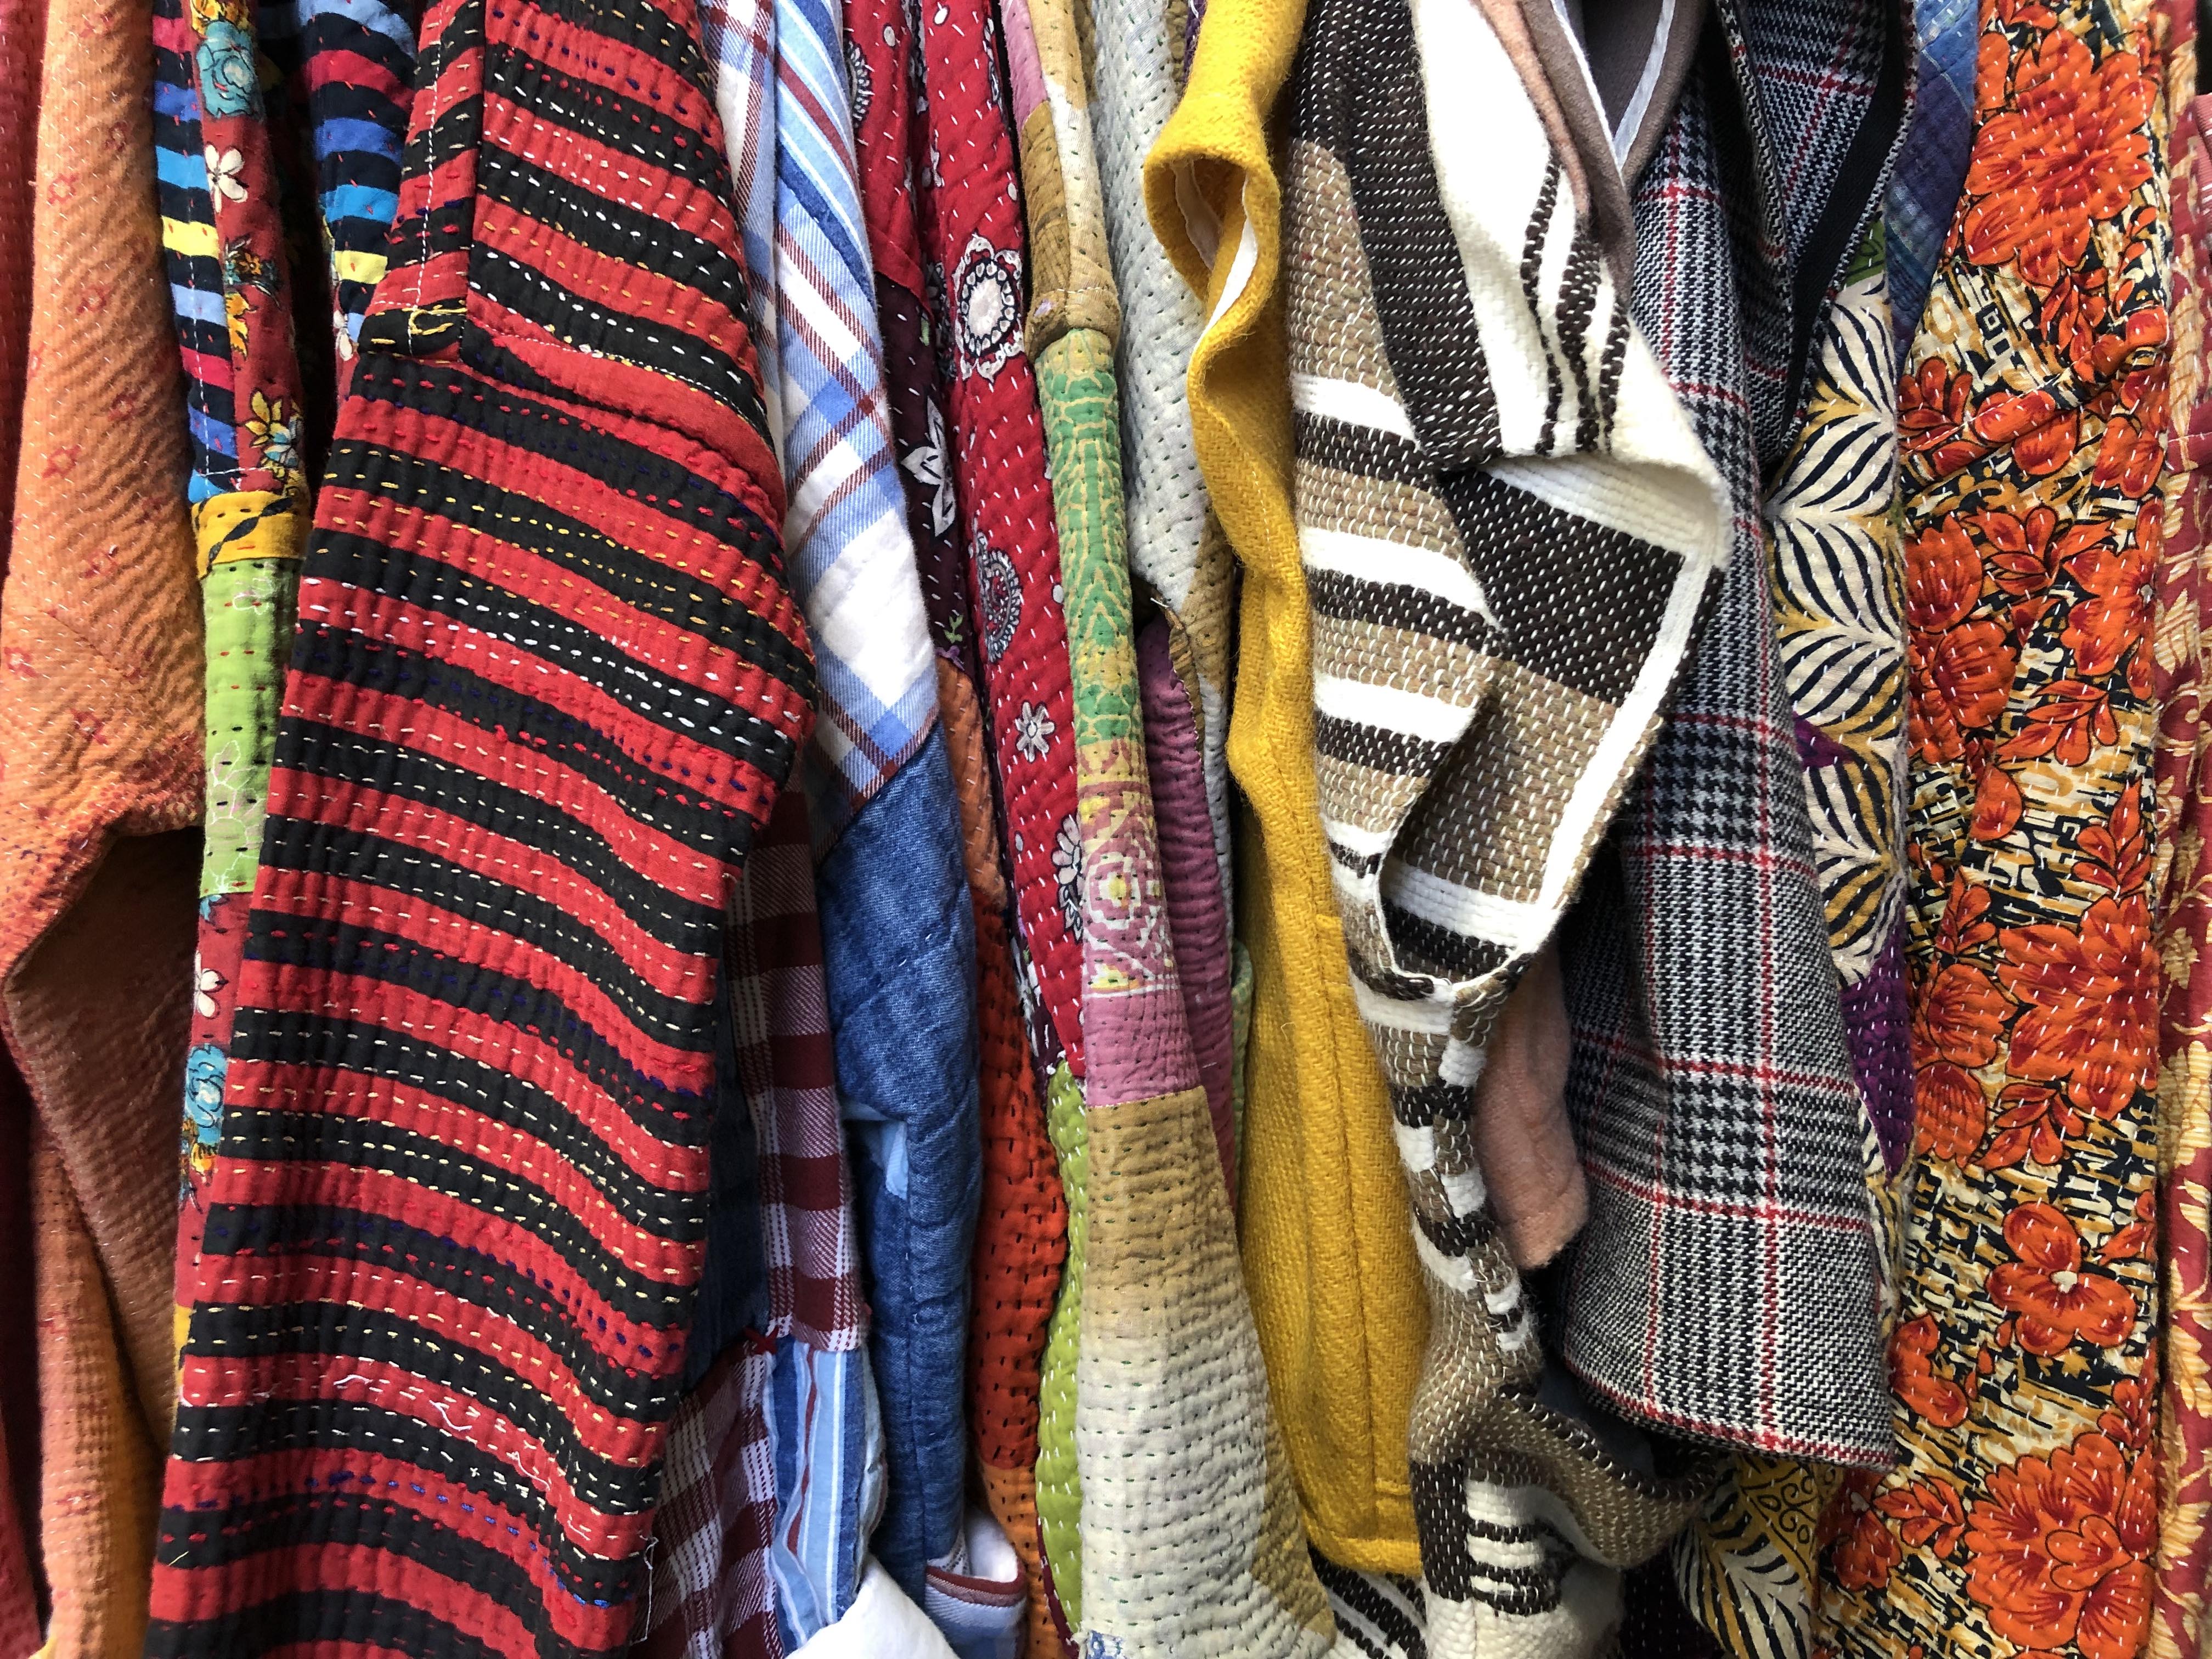 Portions of many colorful and multi-patterned jackets